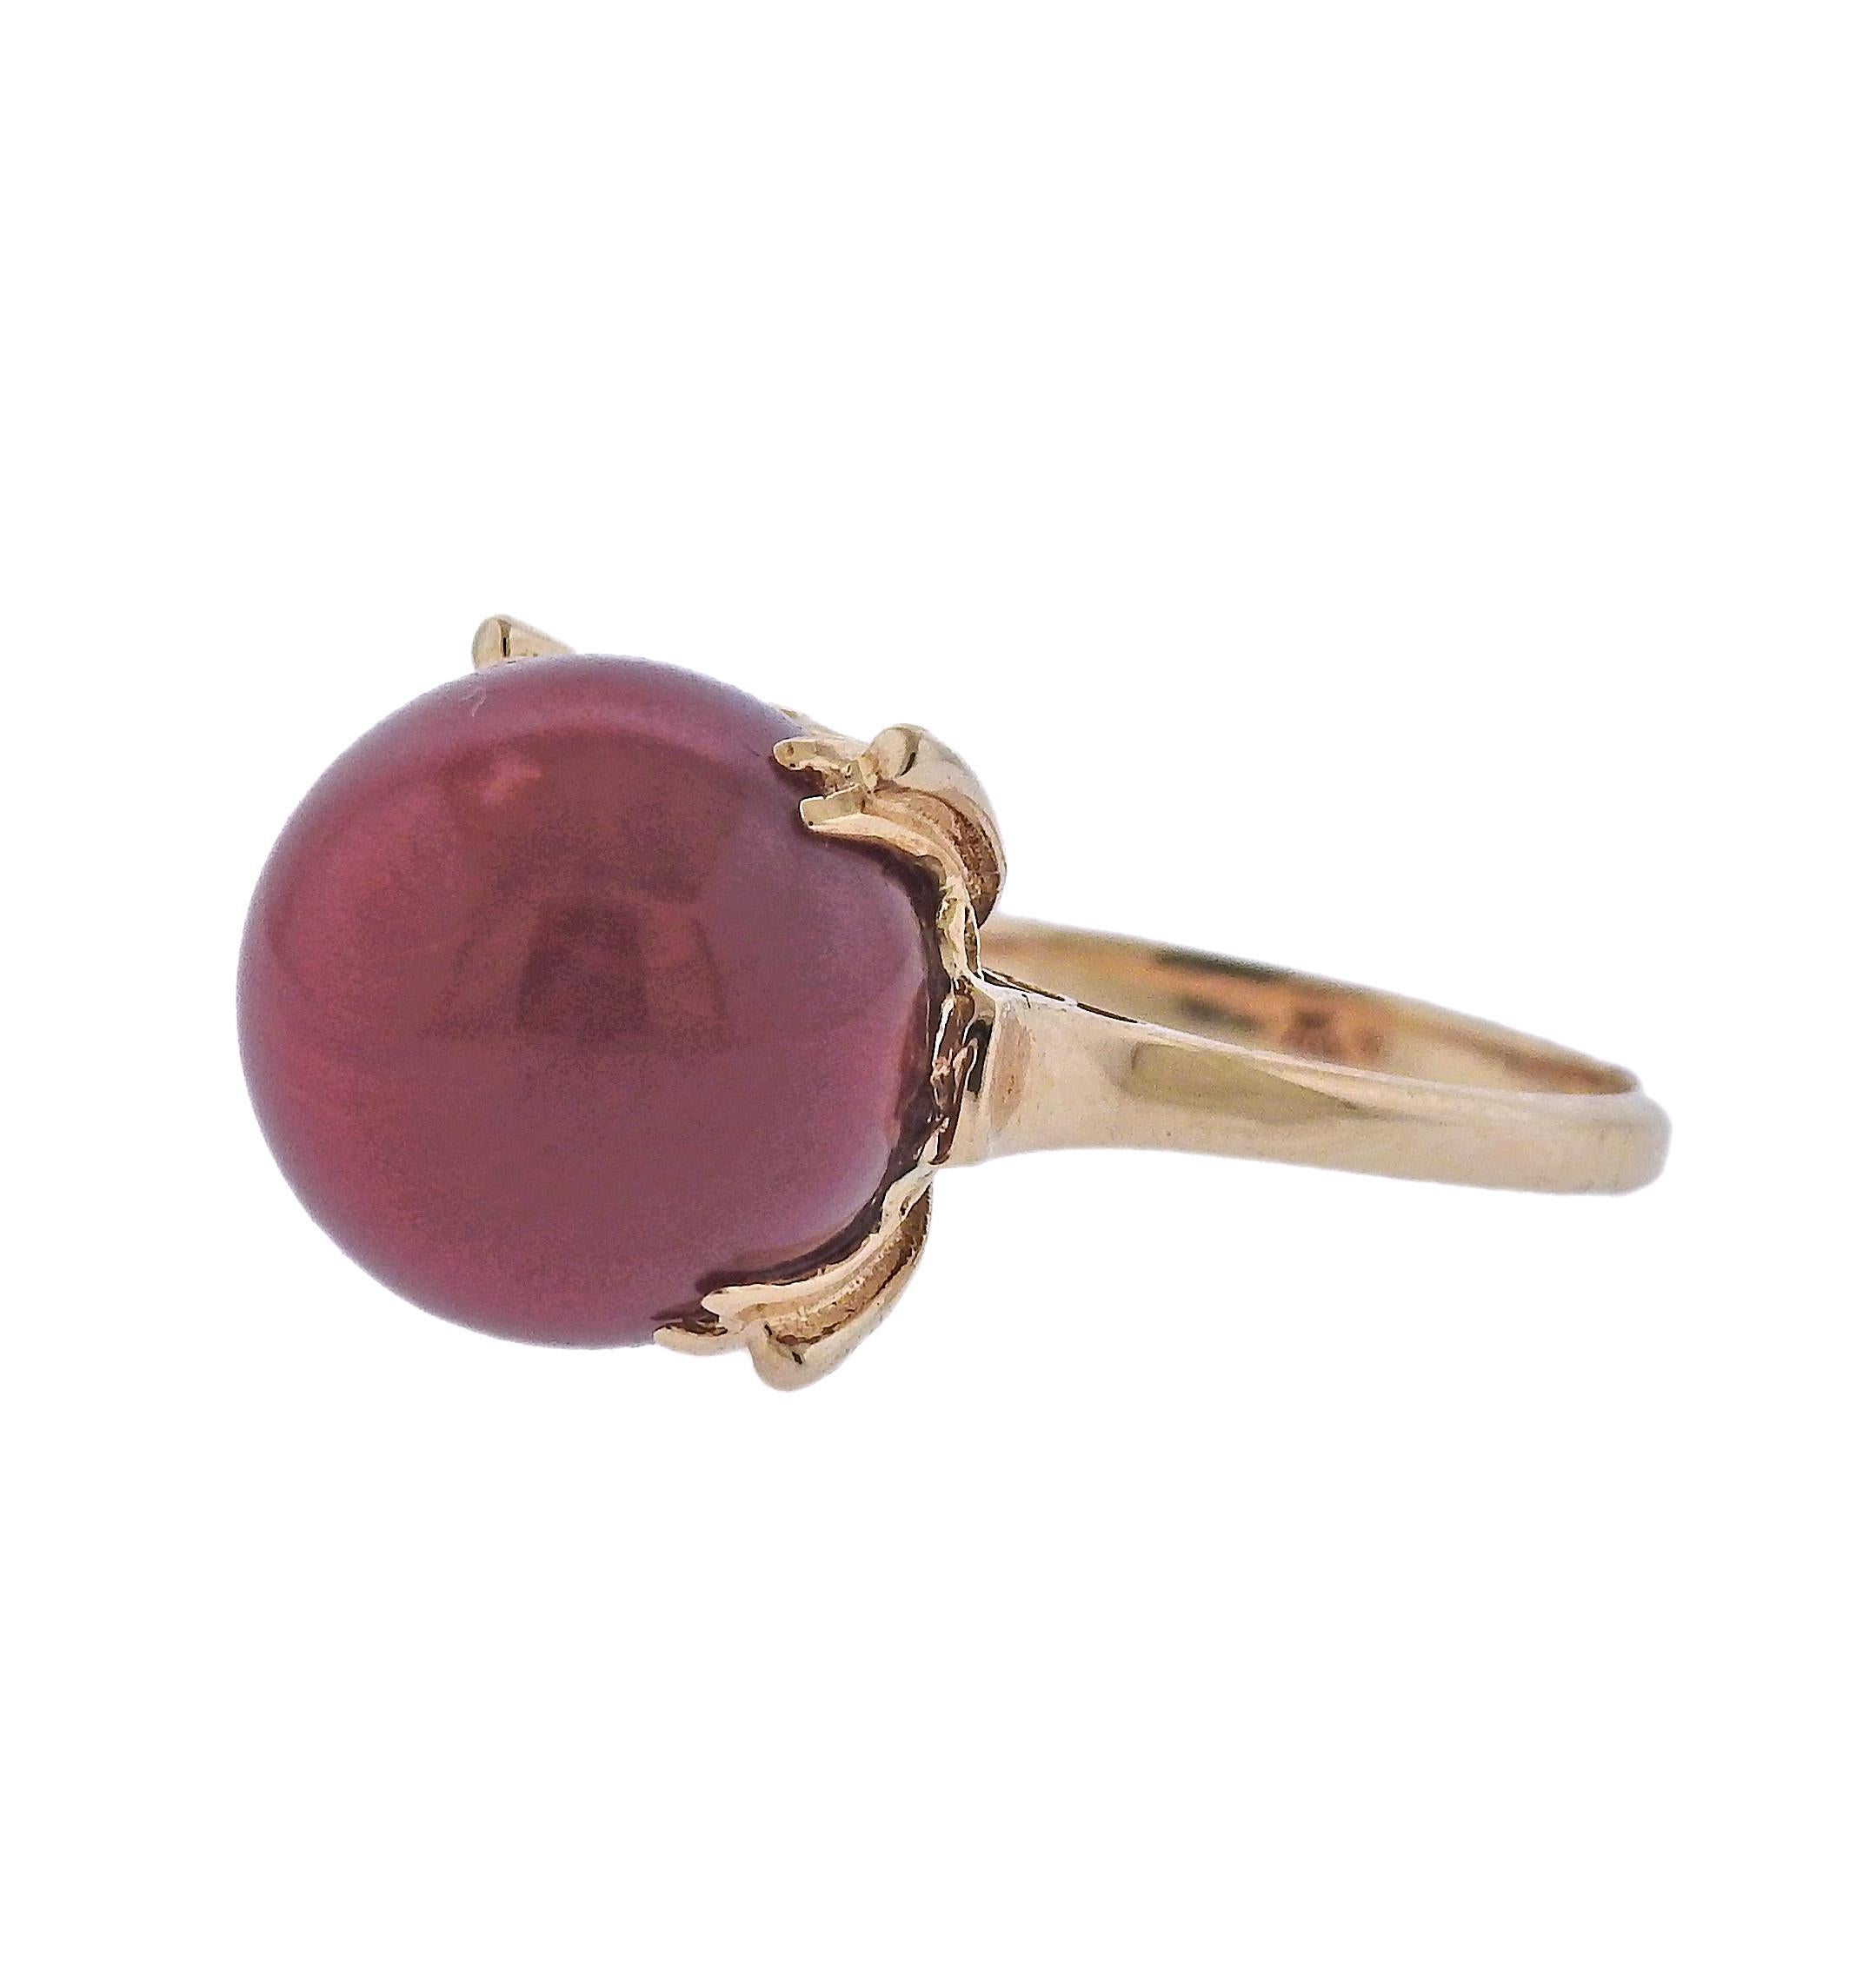 18k yellow gold ring, with 12.7mm coral. Ring size - 6.25. Marked: k18. Weight - 5.8 grams.